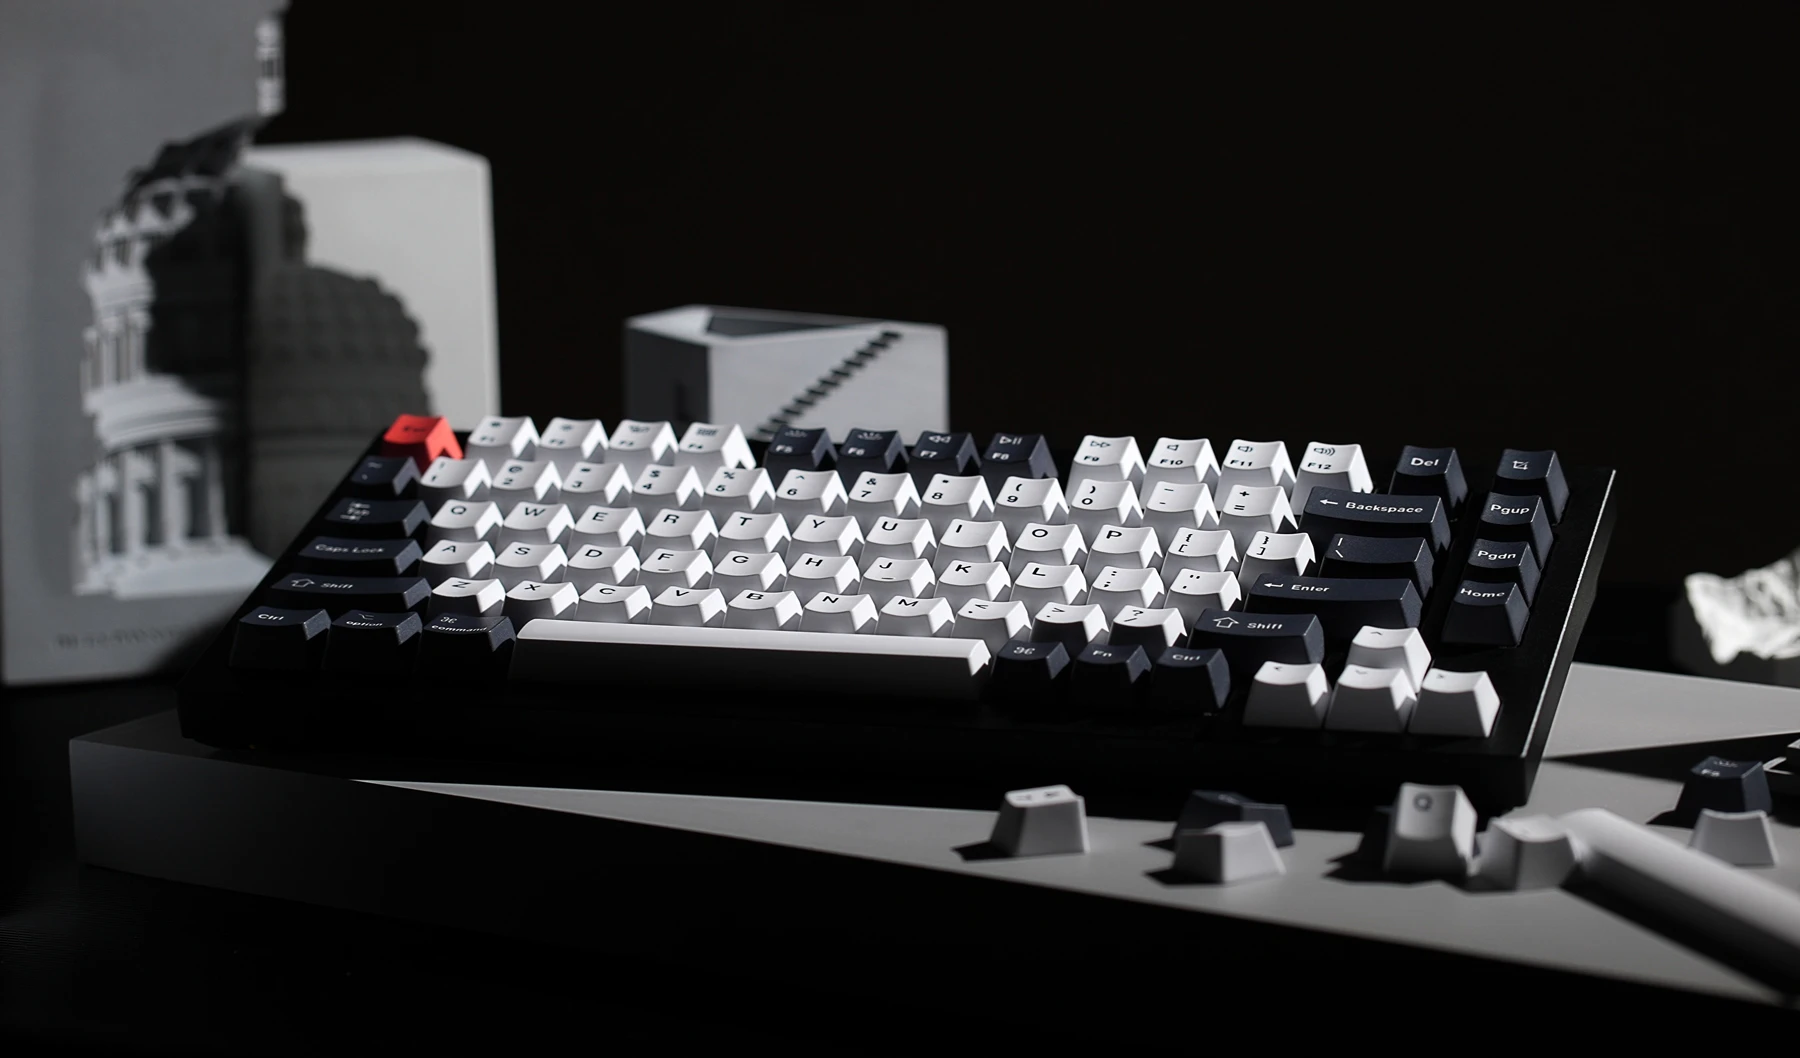 The Keychron Q1 keyboard with some extra keycaps laying on top of a desktop